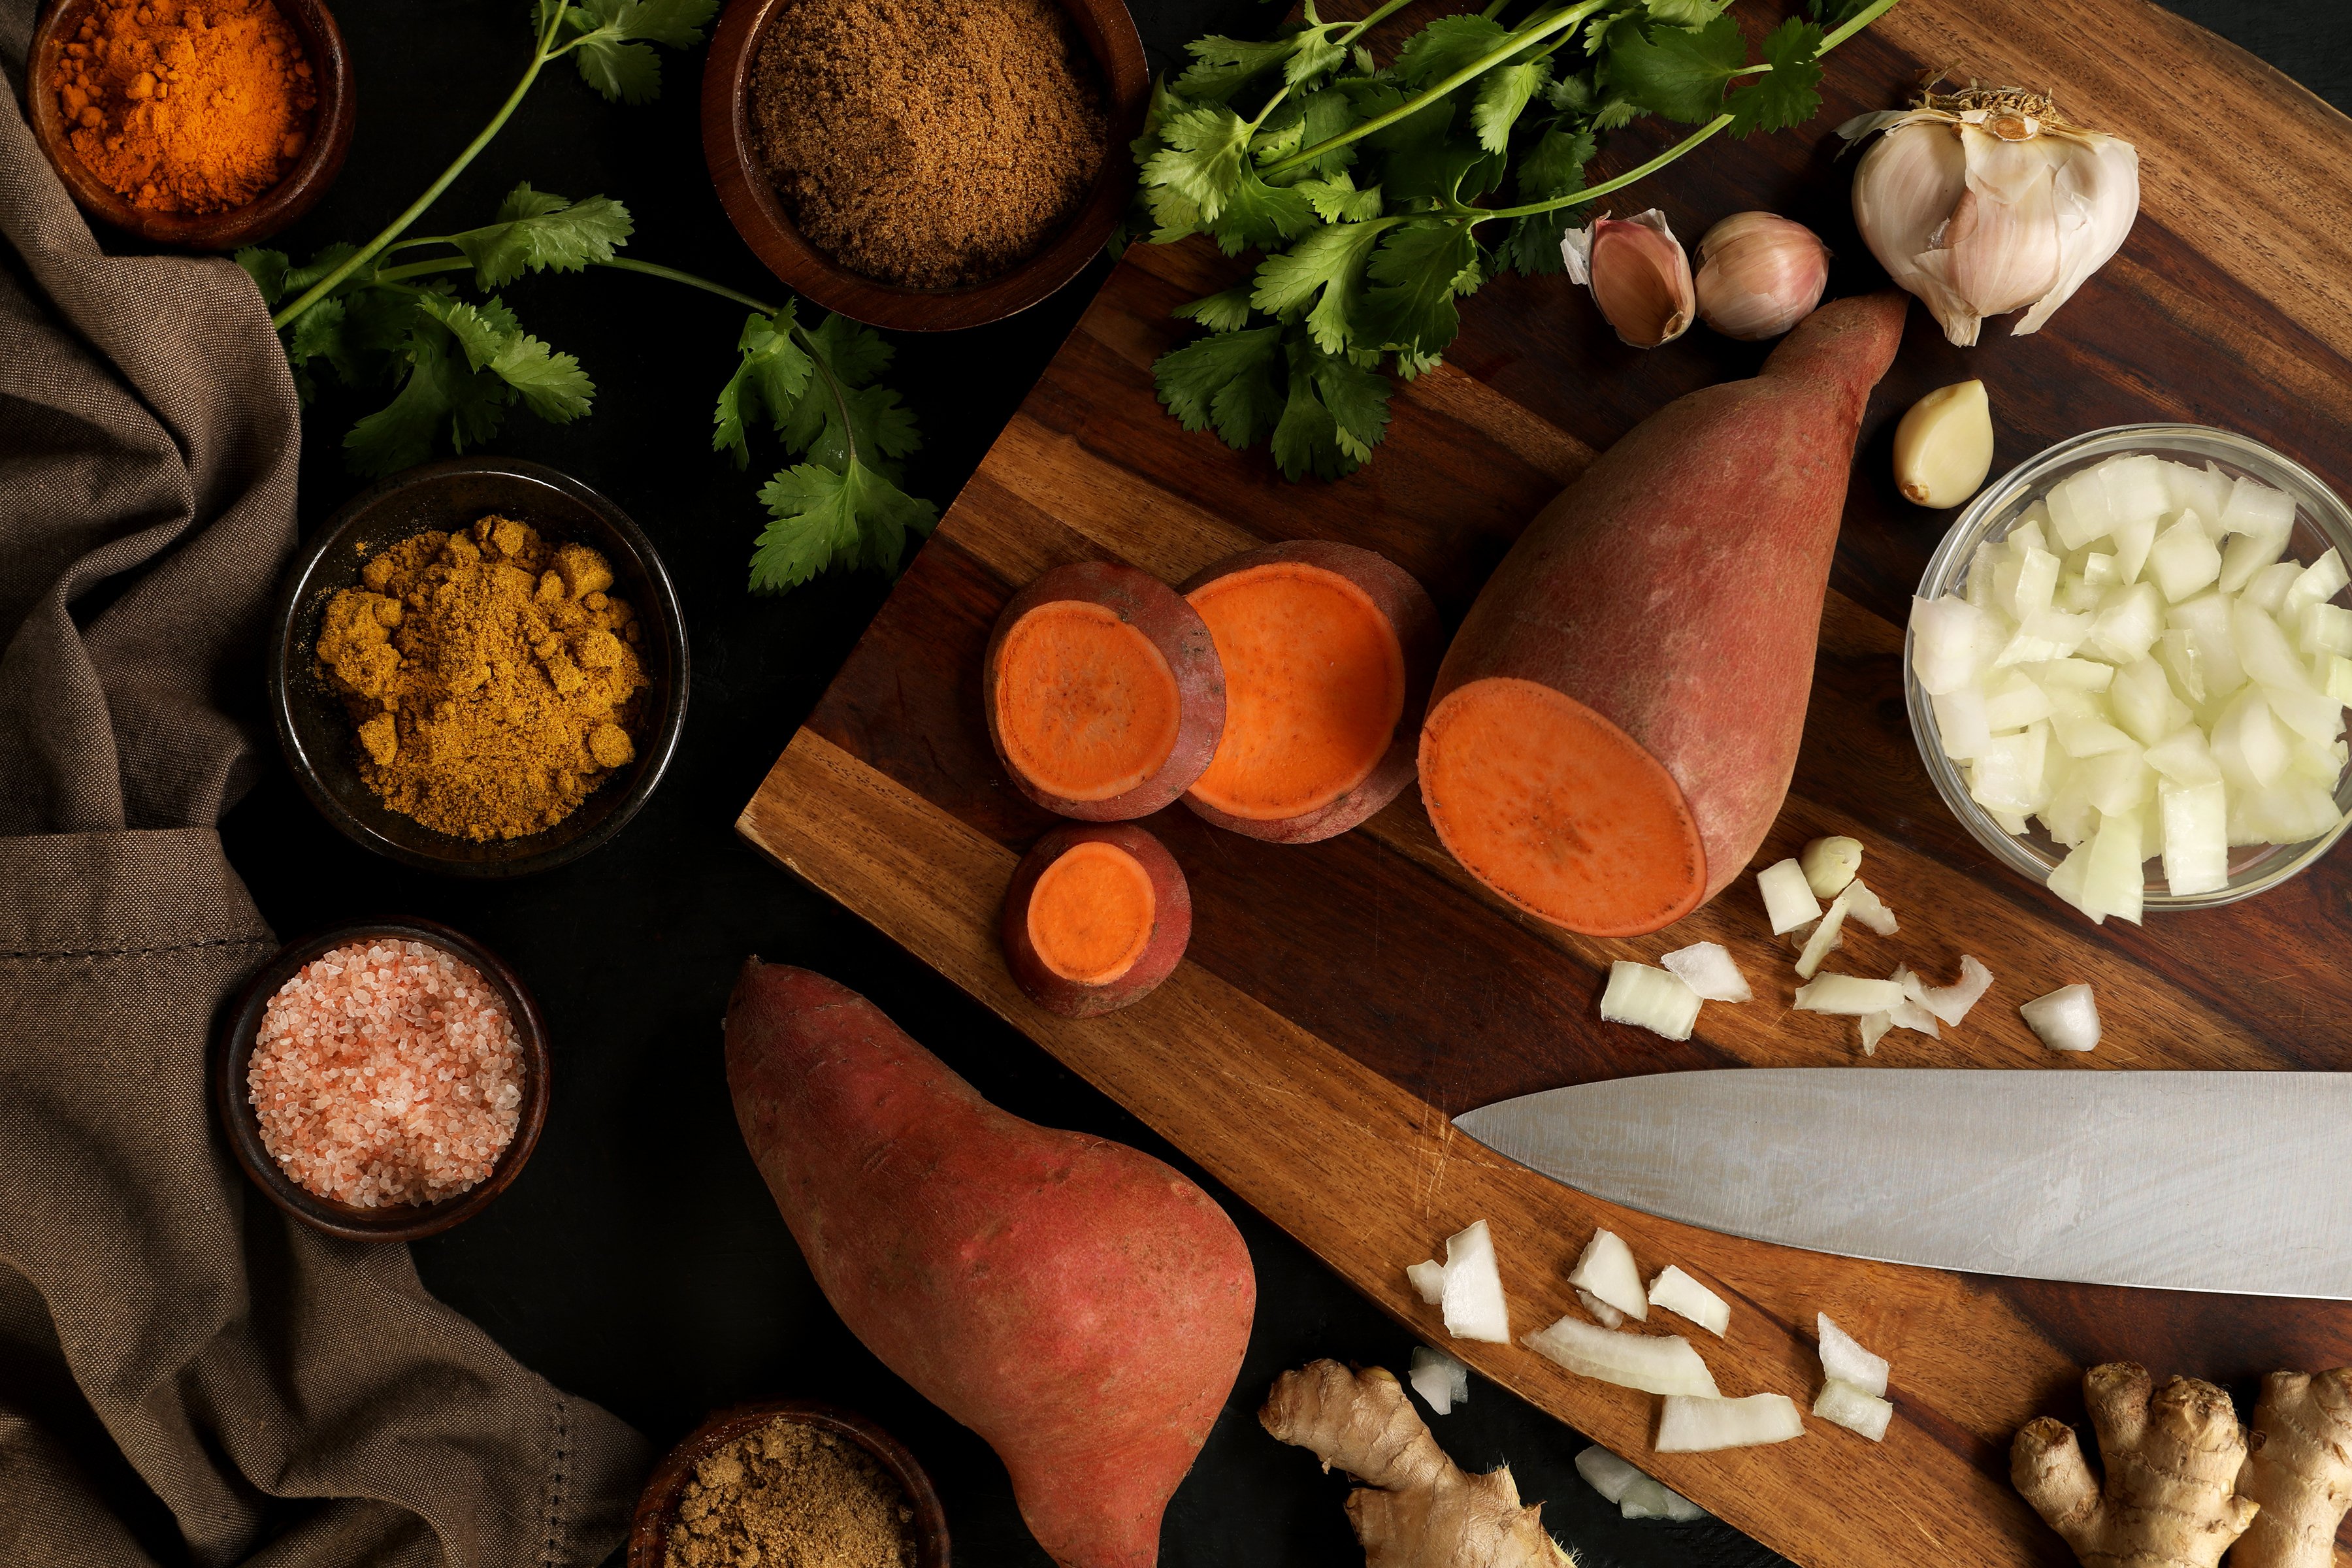 Ingredients for making a vegan coconut curry and sweet potato soup from scratch. This creamy soup is delicious and healthful, using Indian spices like curry powder, cinnamon, and ginger. 